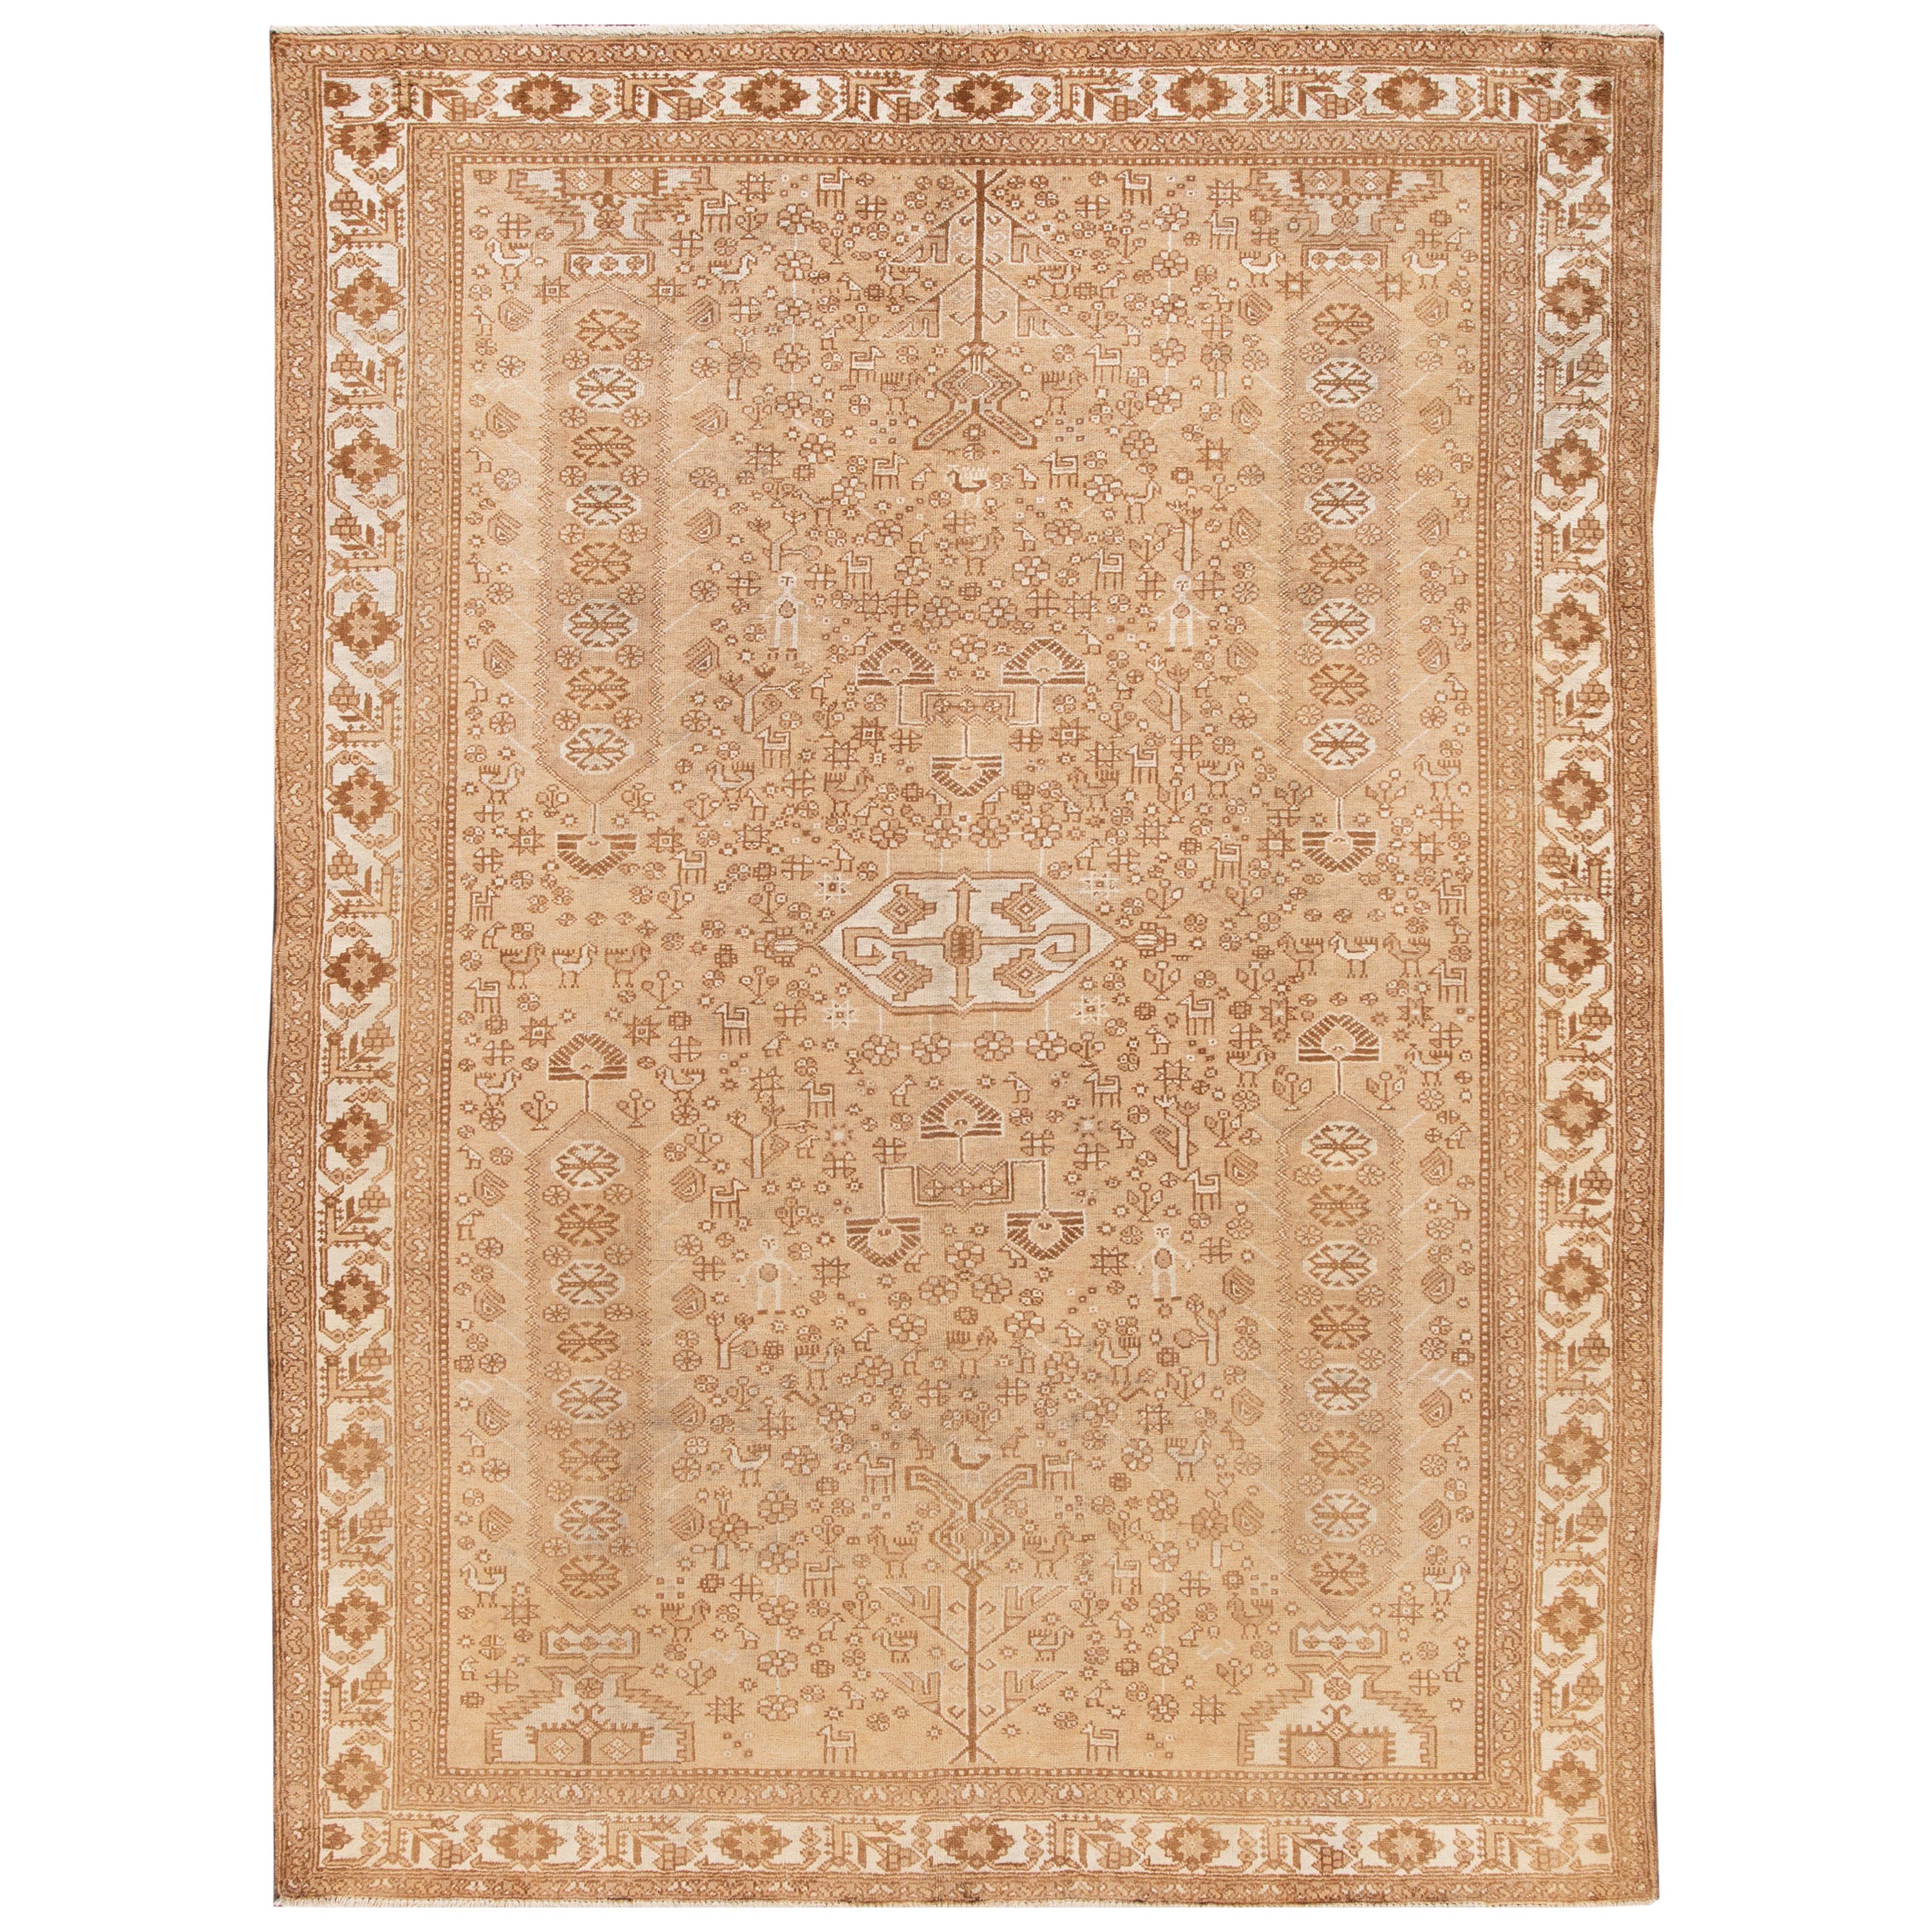 Vintage Persian Hamadan Wool Rug Handmade With Allover Design In Beige Tan Color For Sale